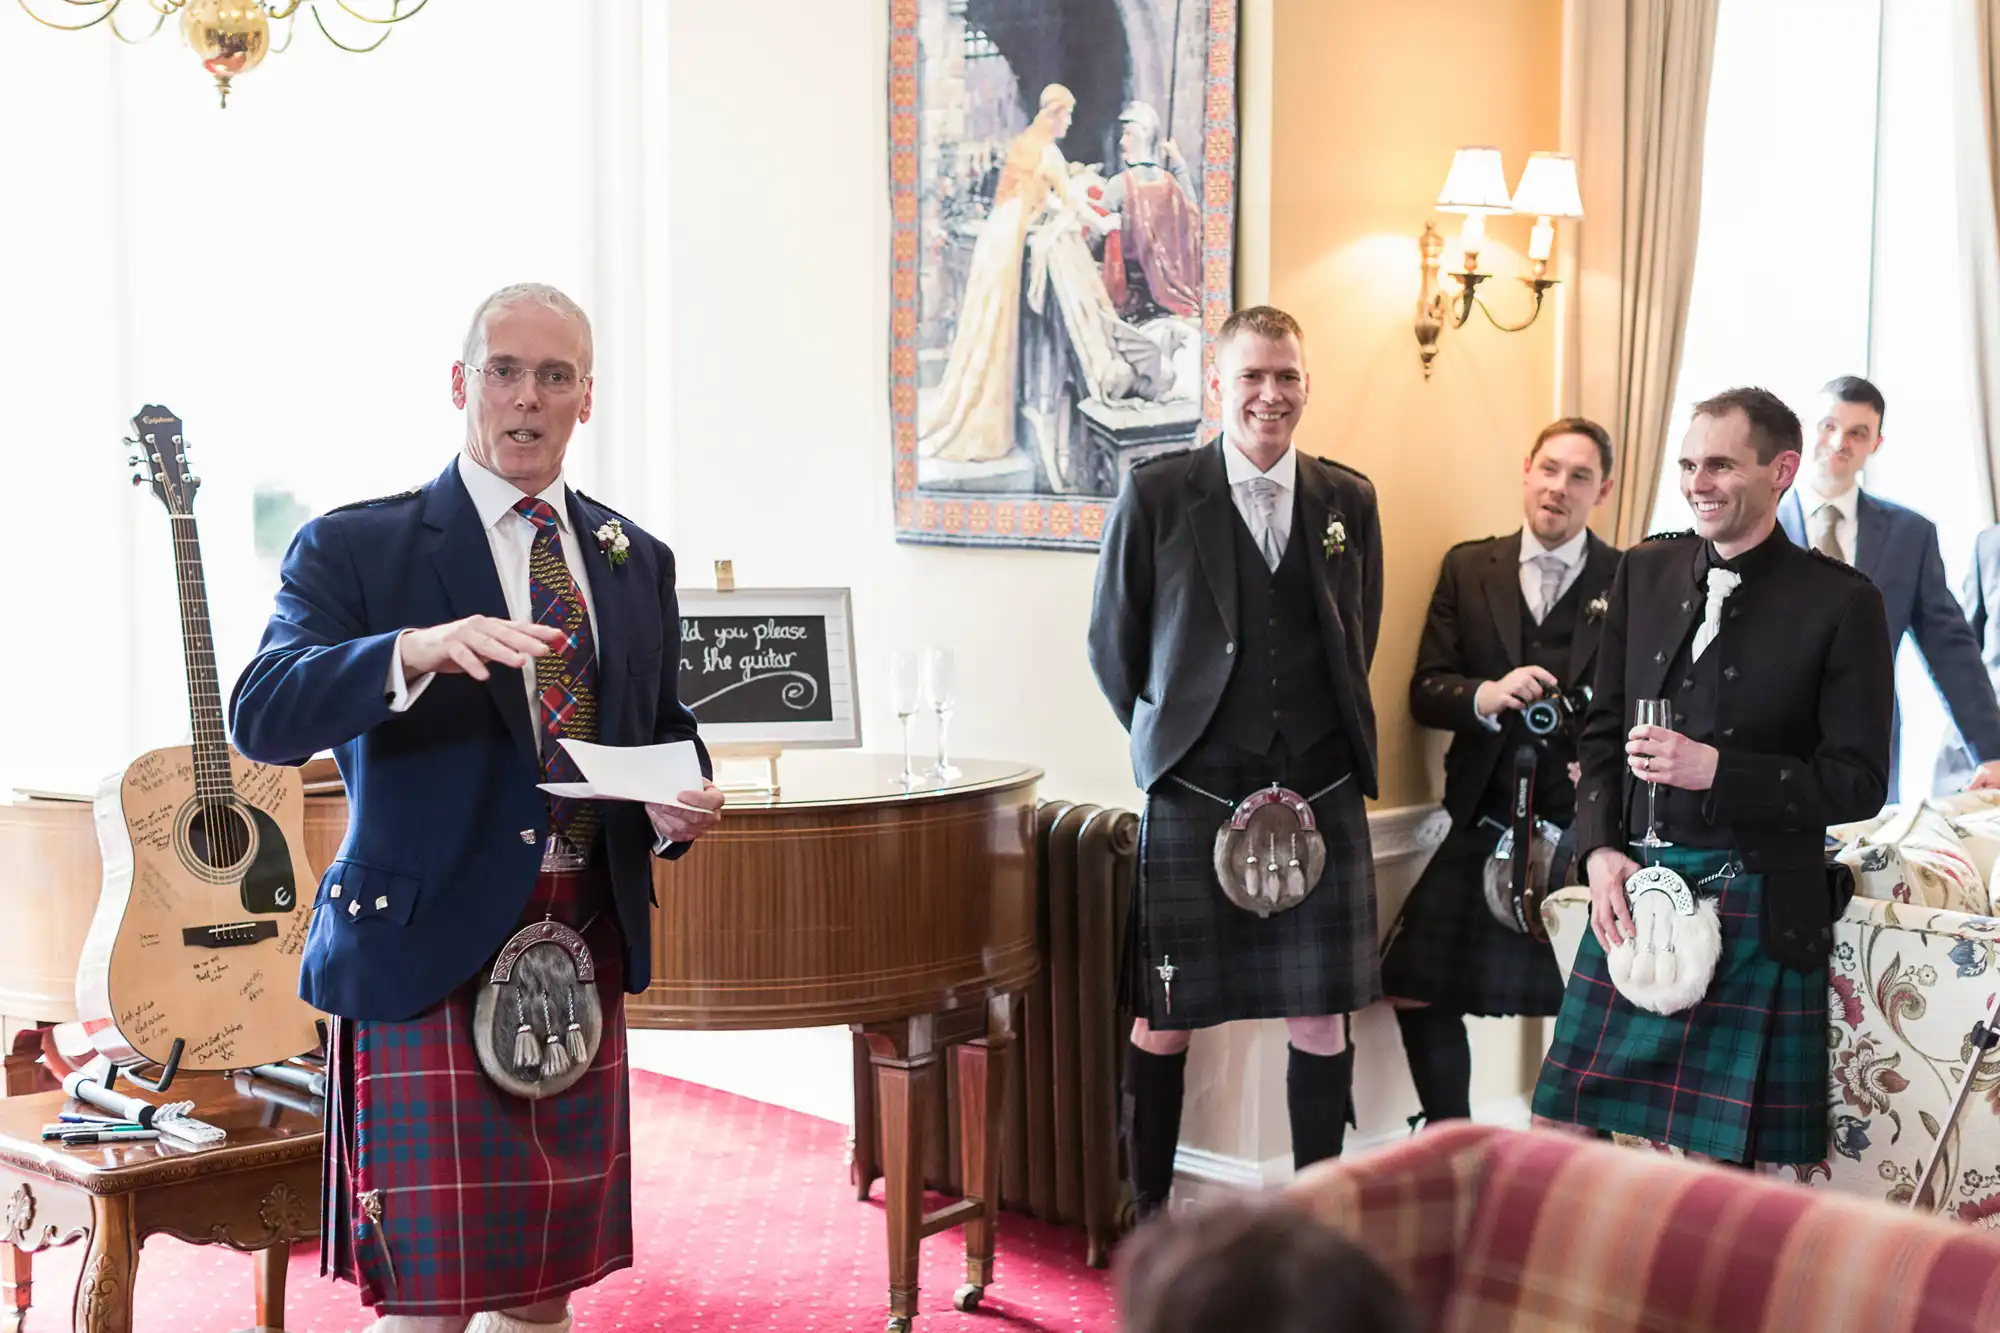 A man in a kilt speaking at a wedding event, holding a piece of paper, with three other men in kilts smiling around him in a decorated room.